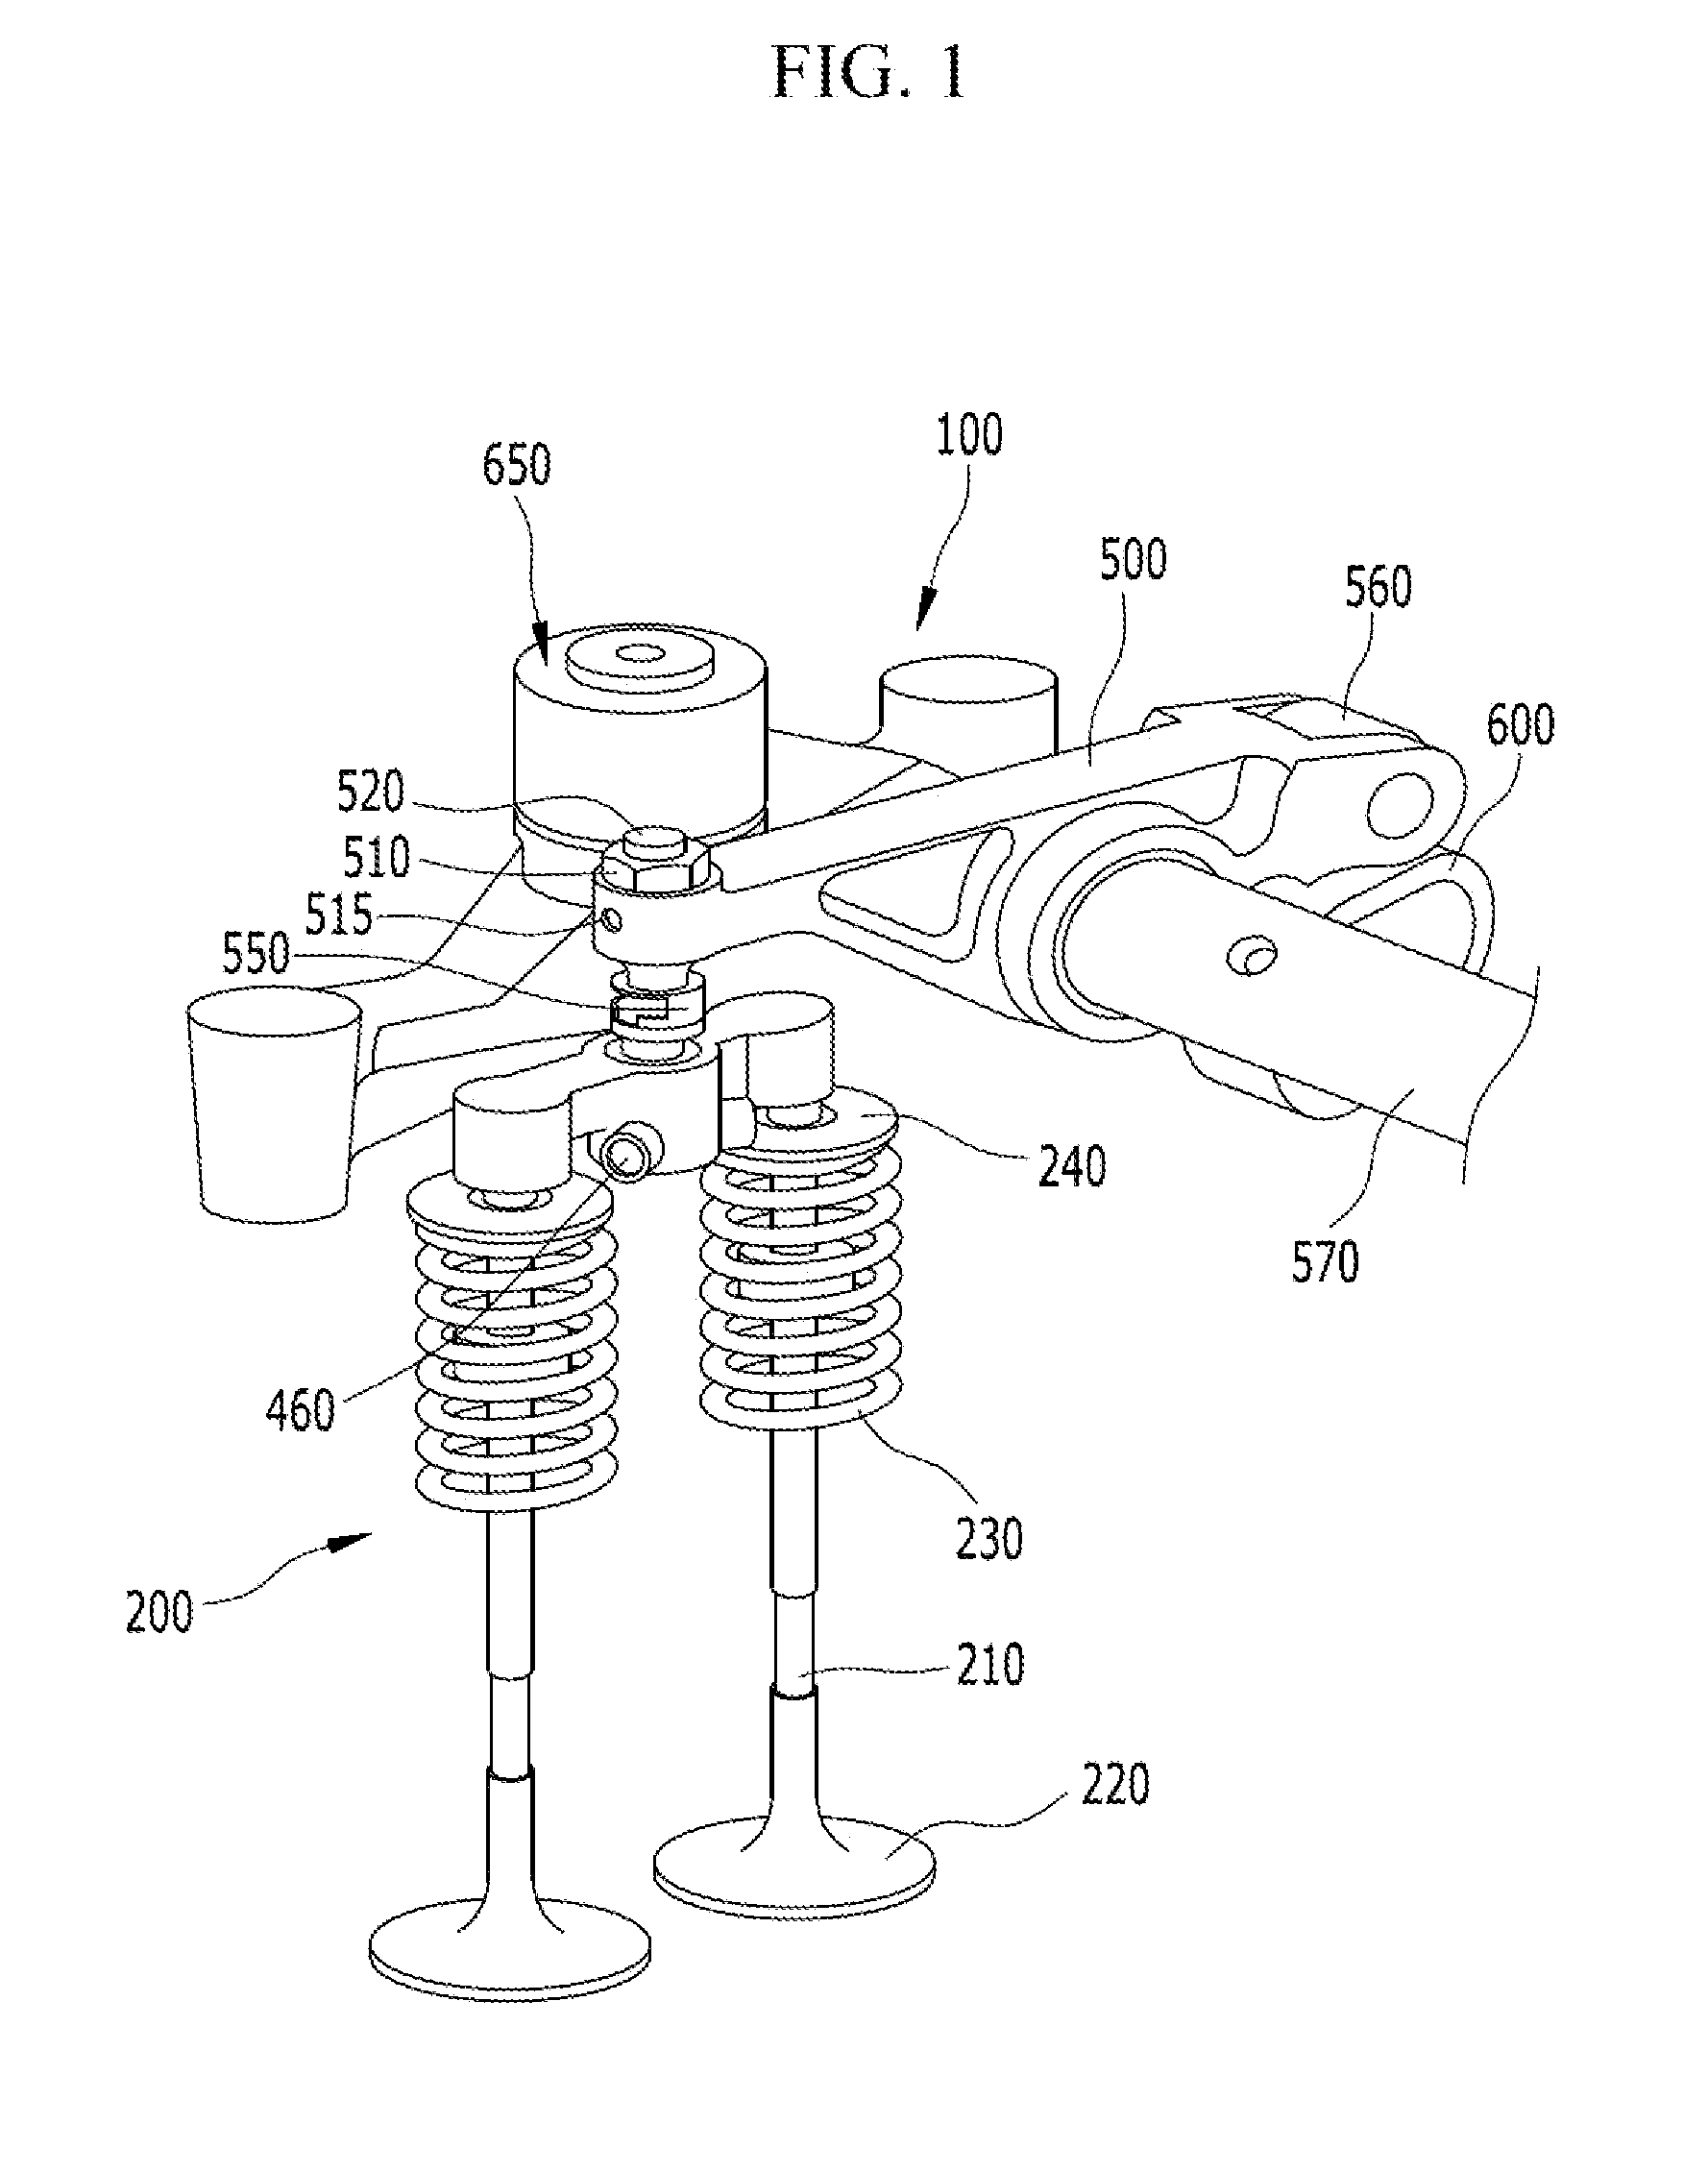 Variable valve actuator assembly integrated with valve bridge